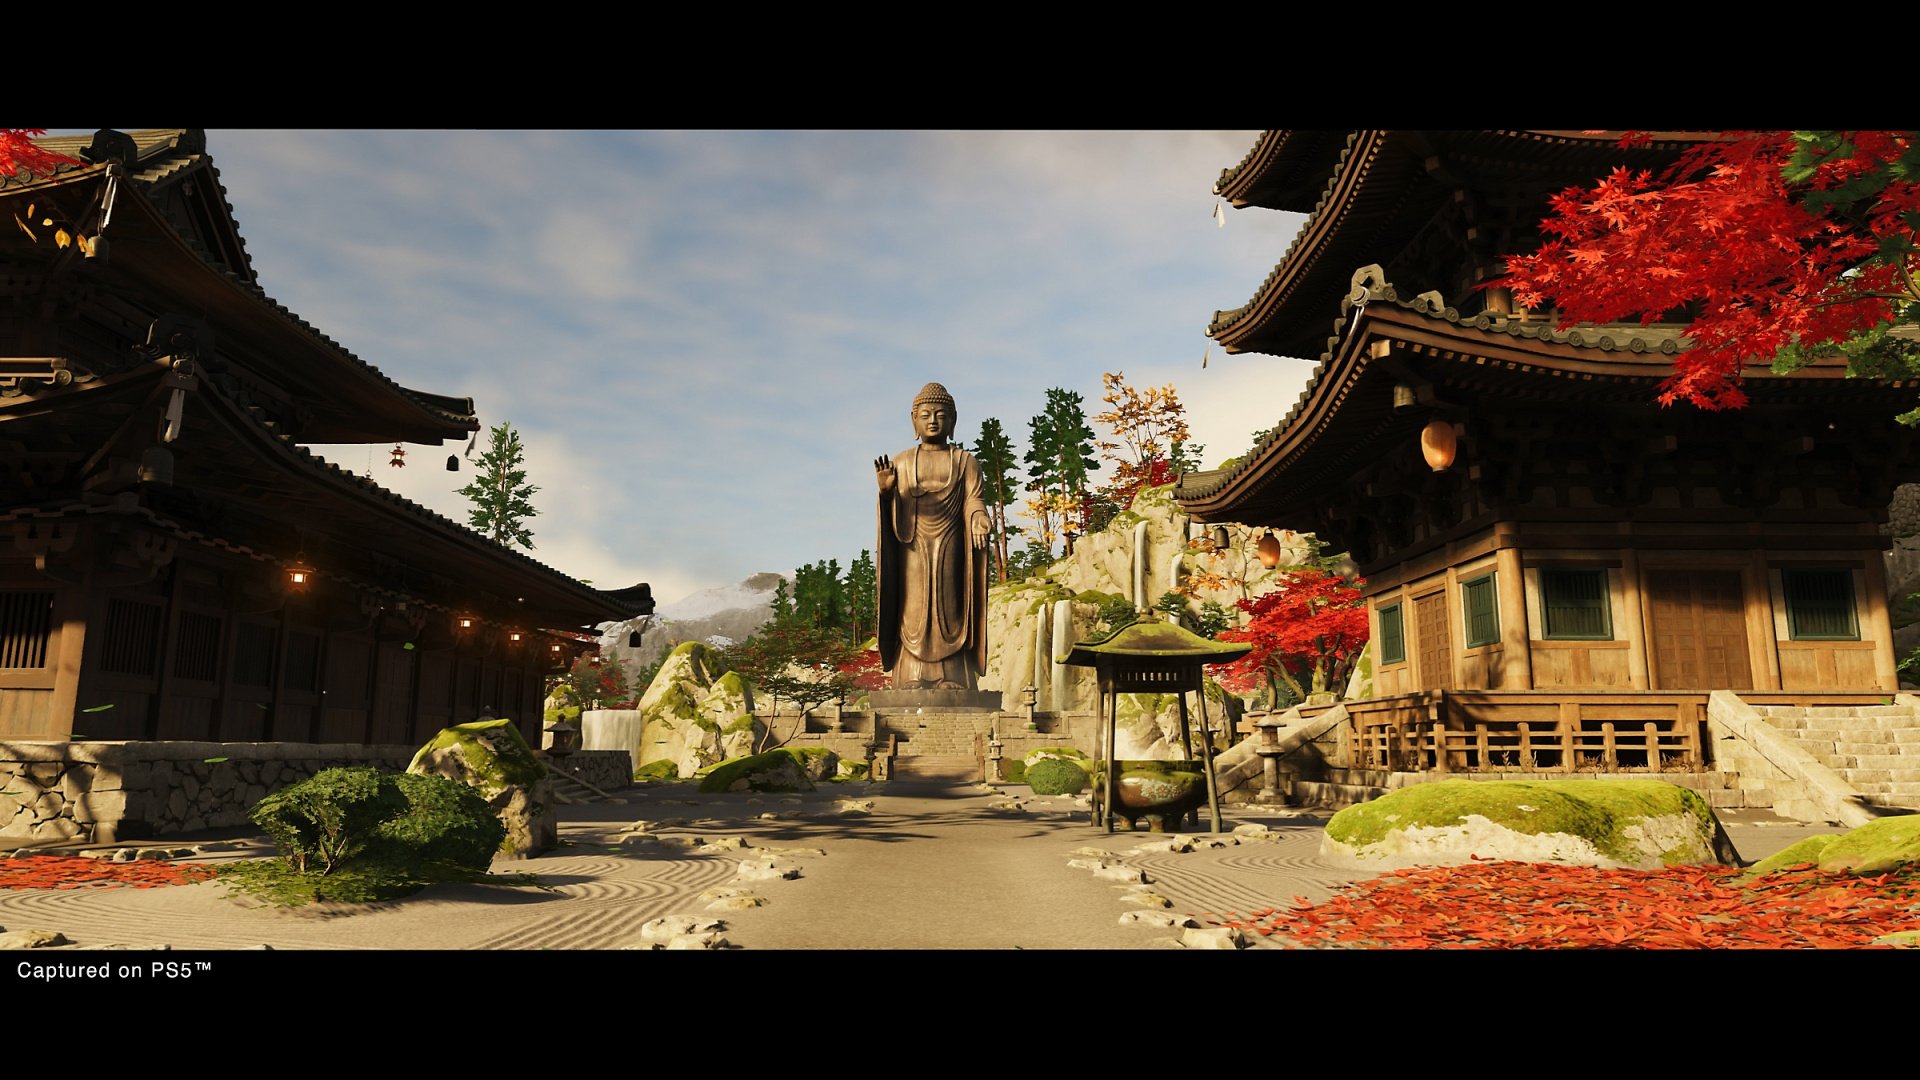 Sucker Punch Staffing Up for What Sounds Like Ghost of Tsushima 2